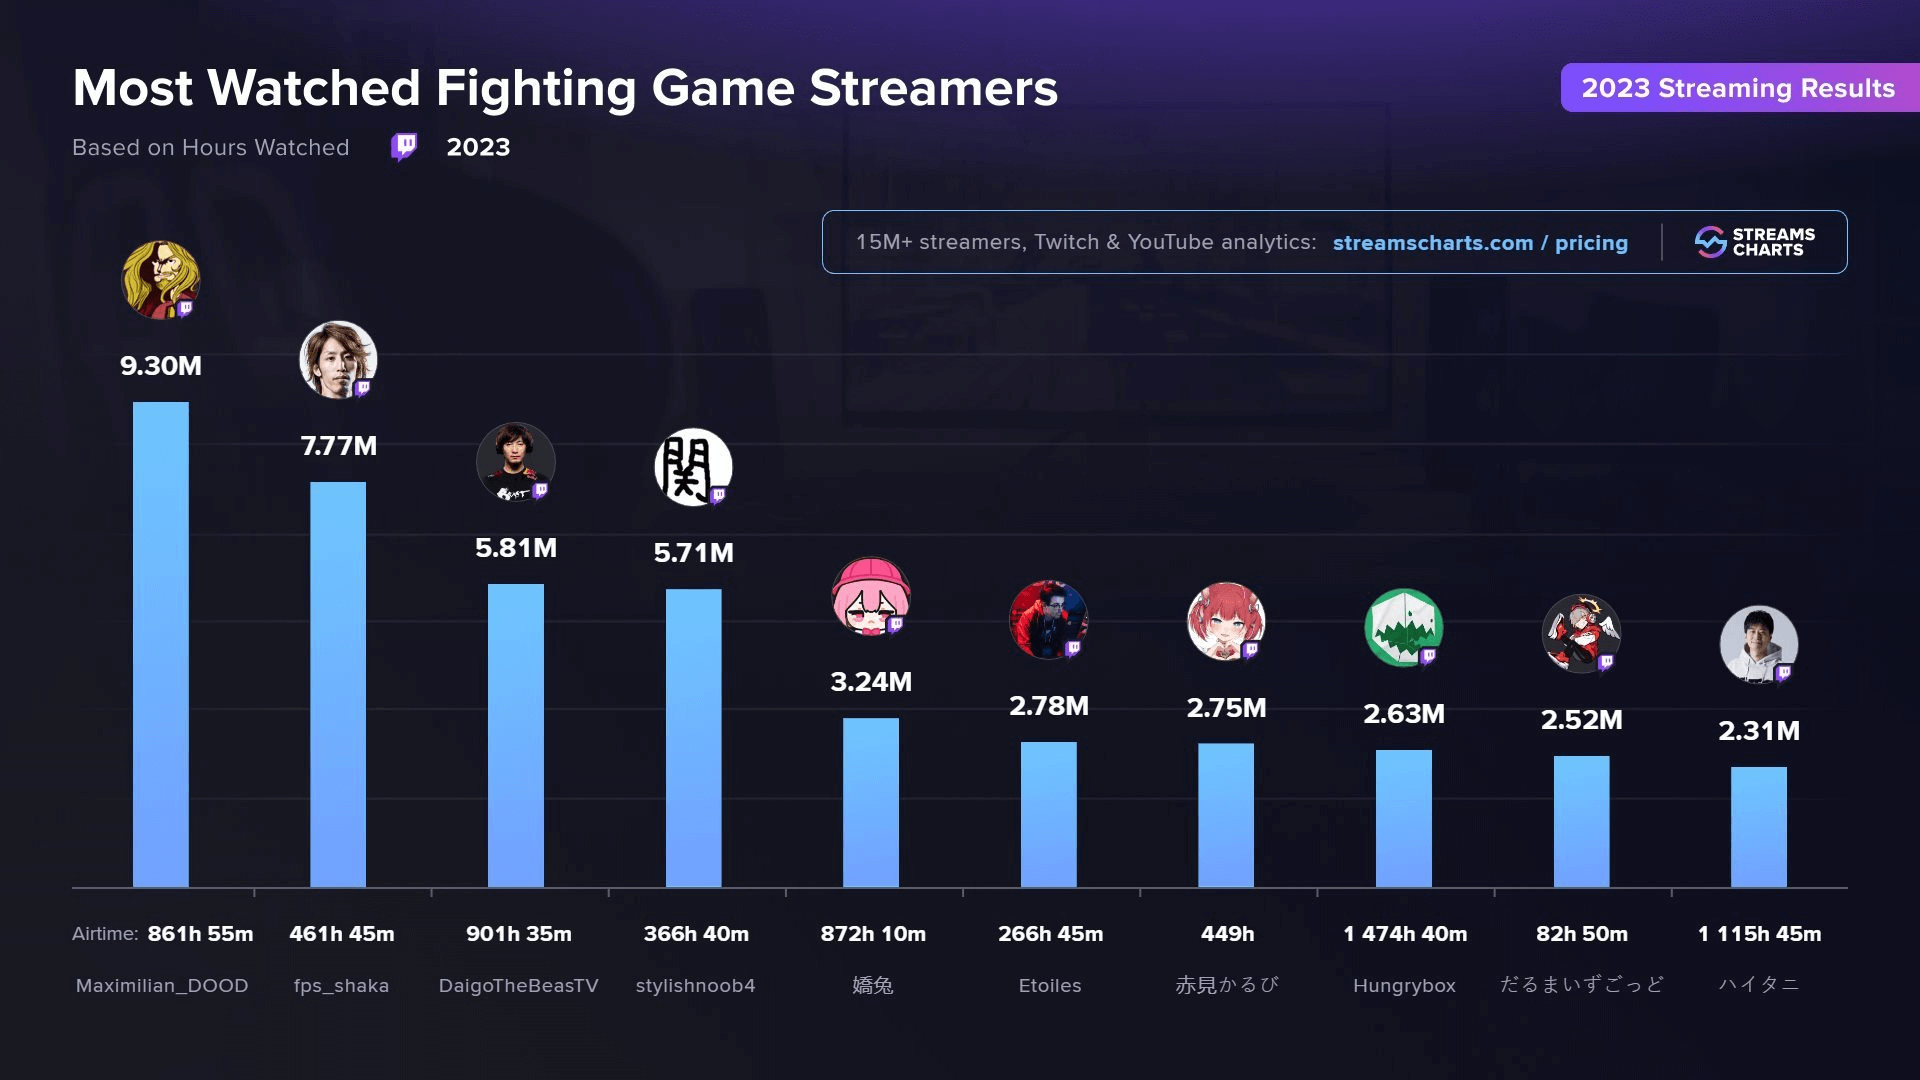 Who are the most watch fighting game streamers of 2023? 